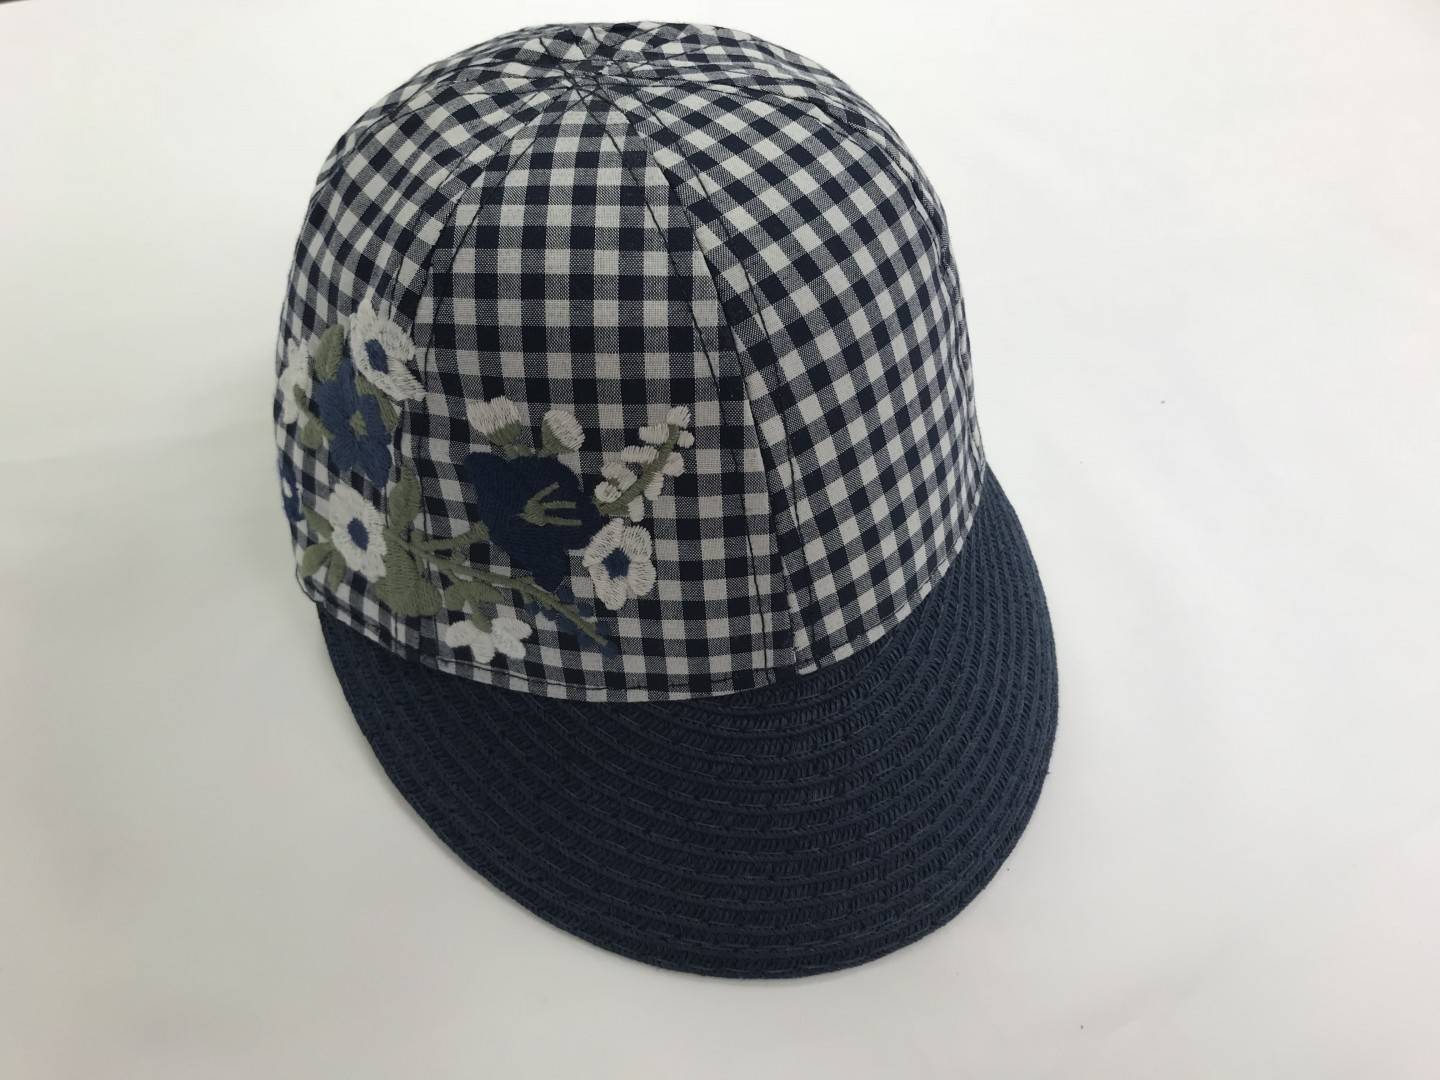 MAYORAL NAVY AND WHITE CAP SIZES SMALL-LARGE